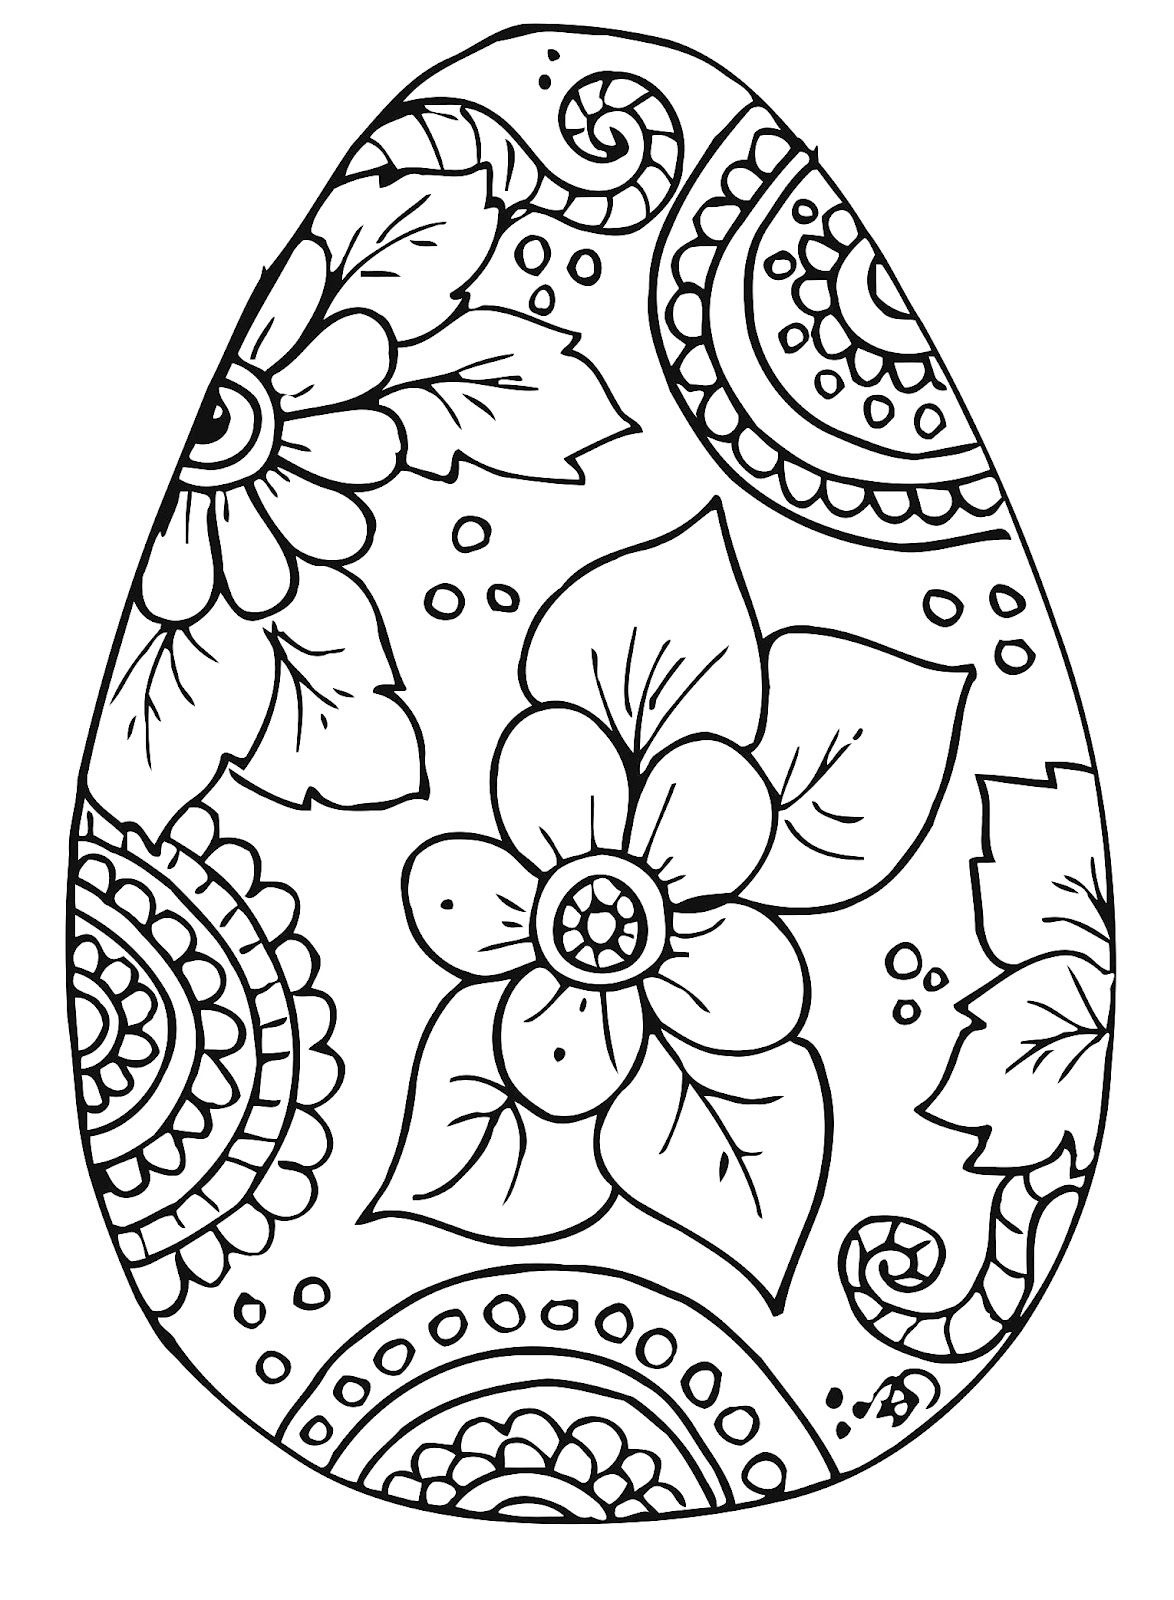 10 Cool Free Printable Easter Coloring Pages For Kids Who've Moved - Free Printable Easter Coloring Pictures